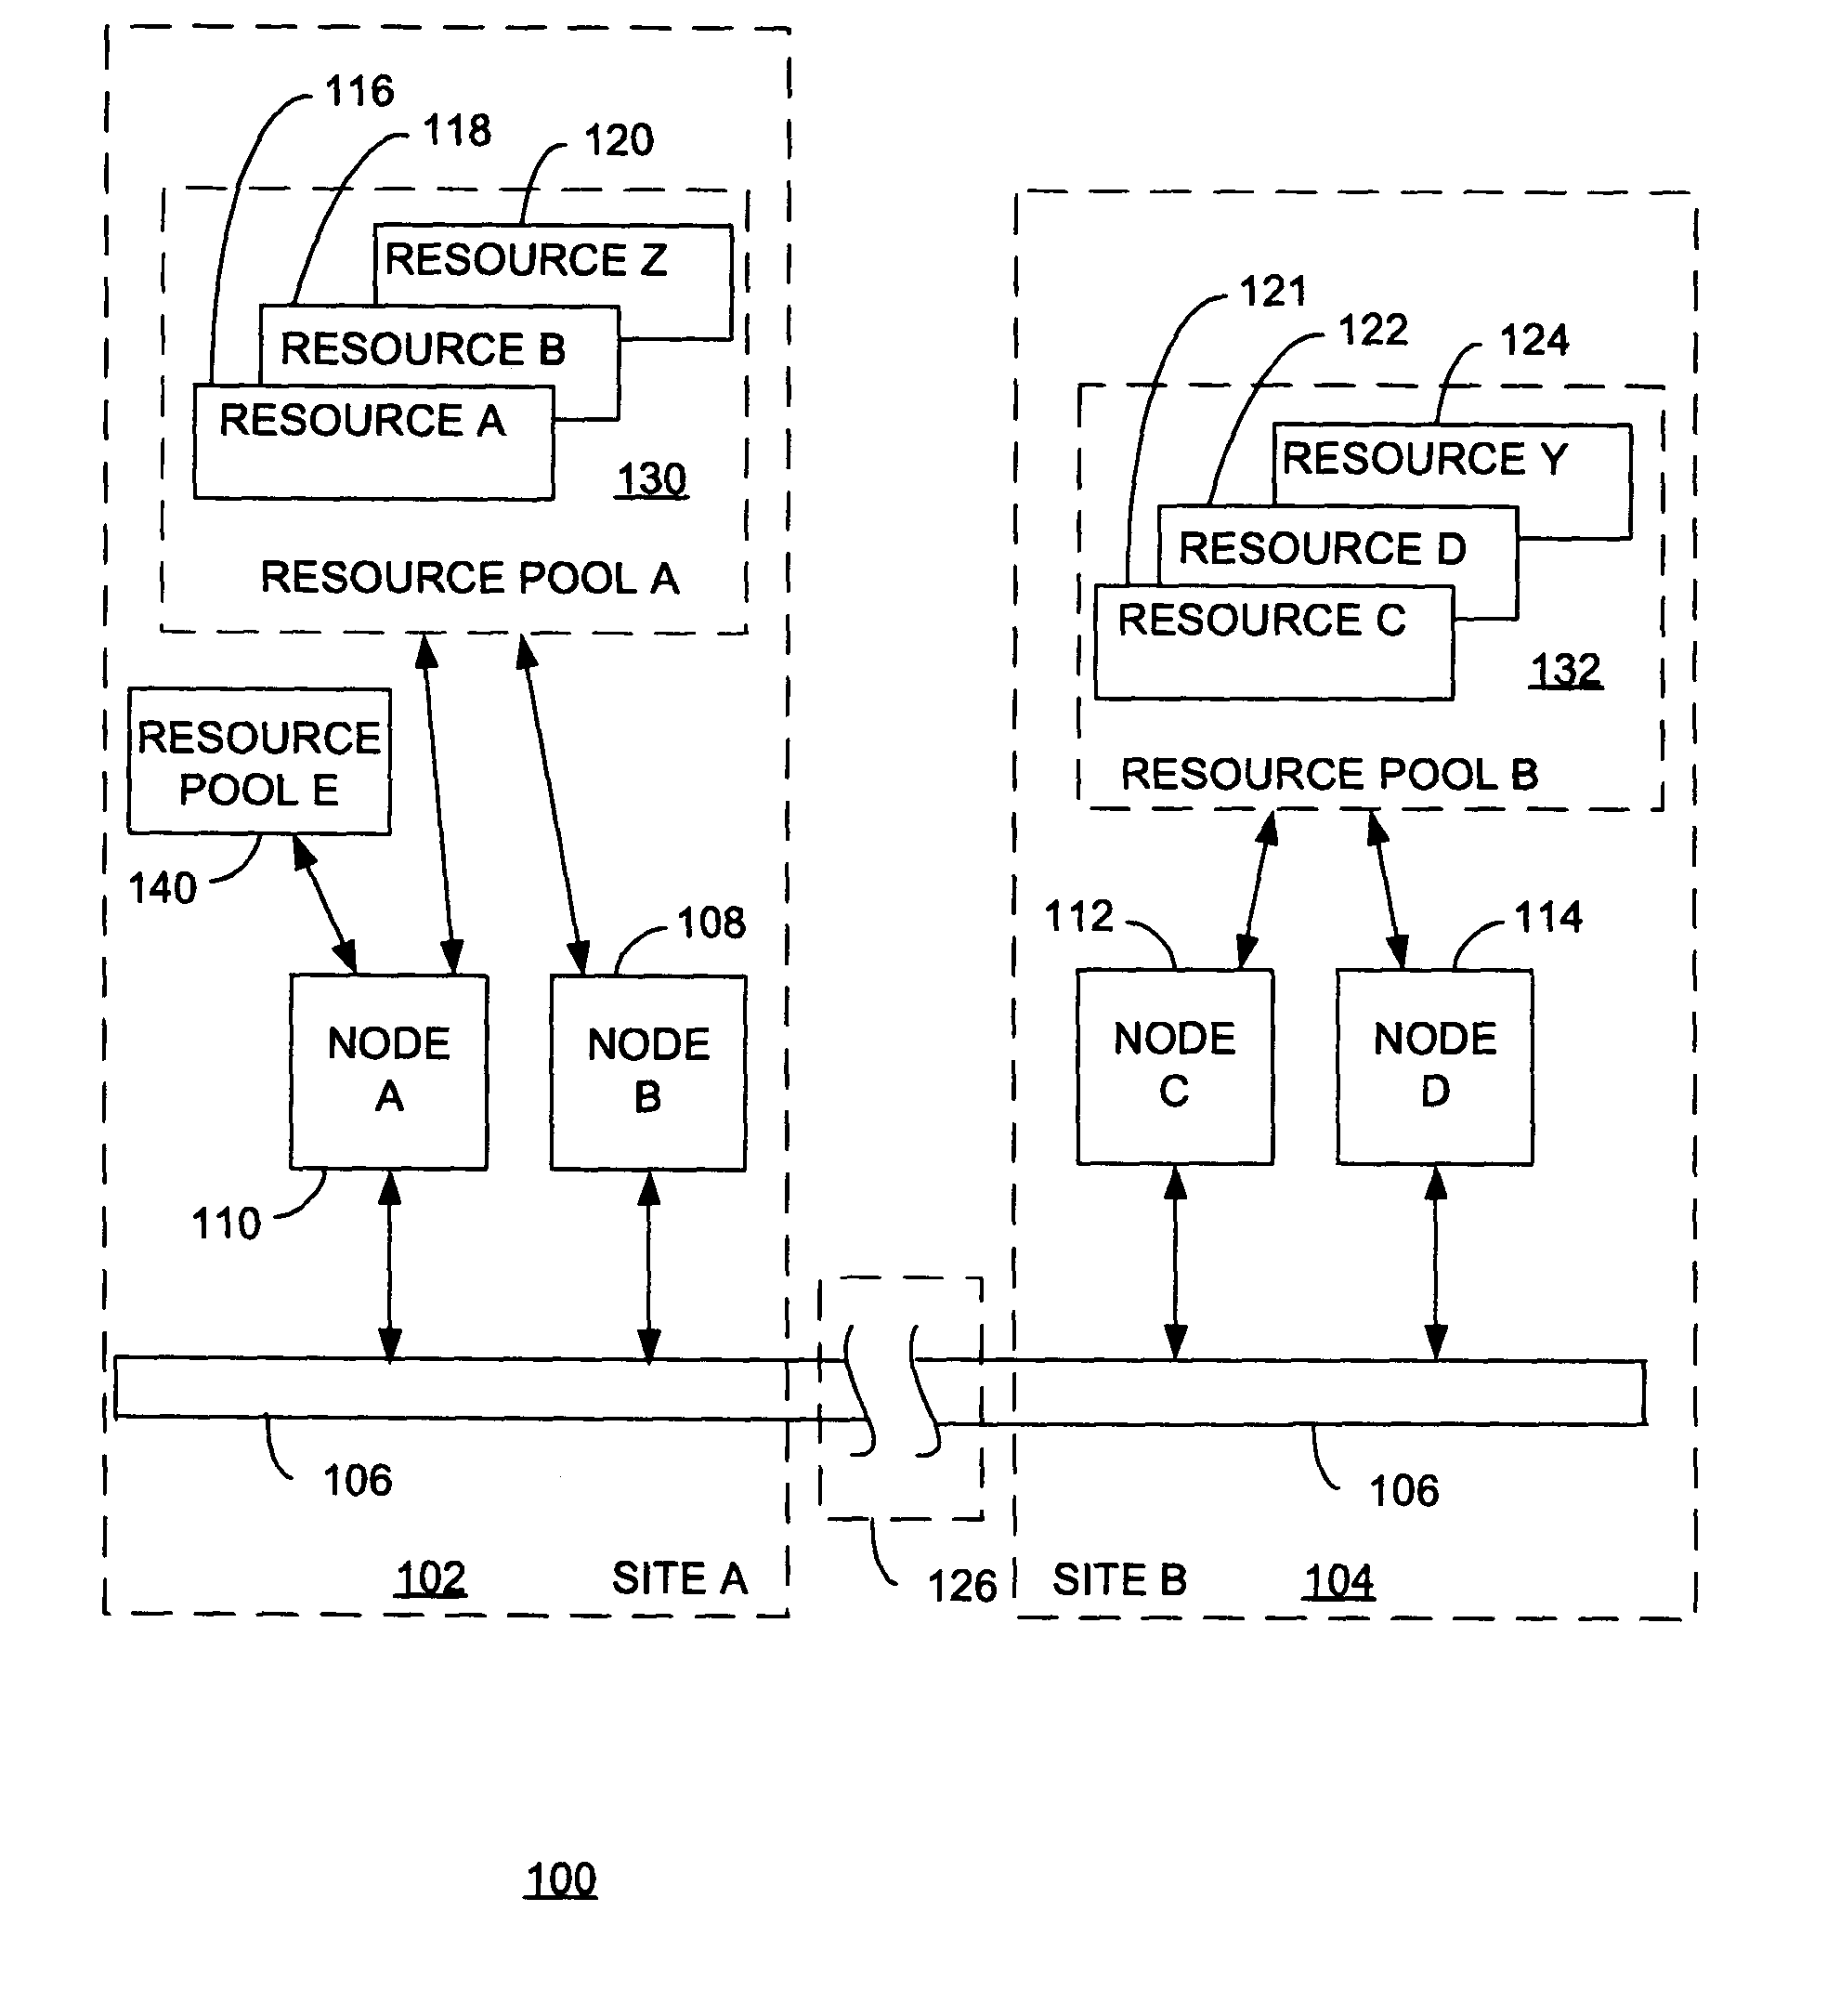 Method and apparatus for validating and ranking resources for geographic mirroring